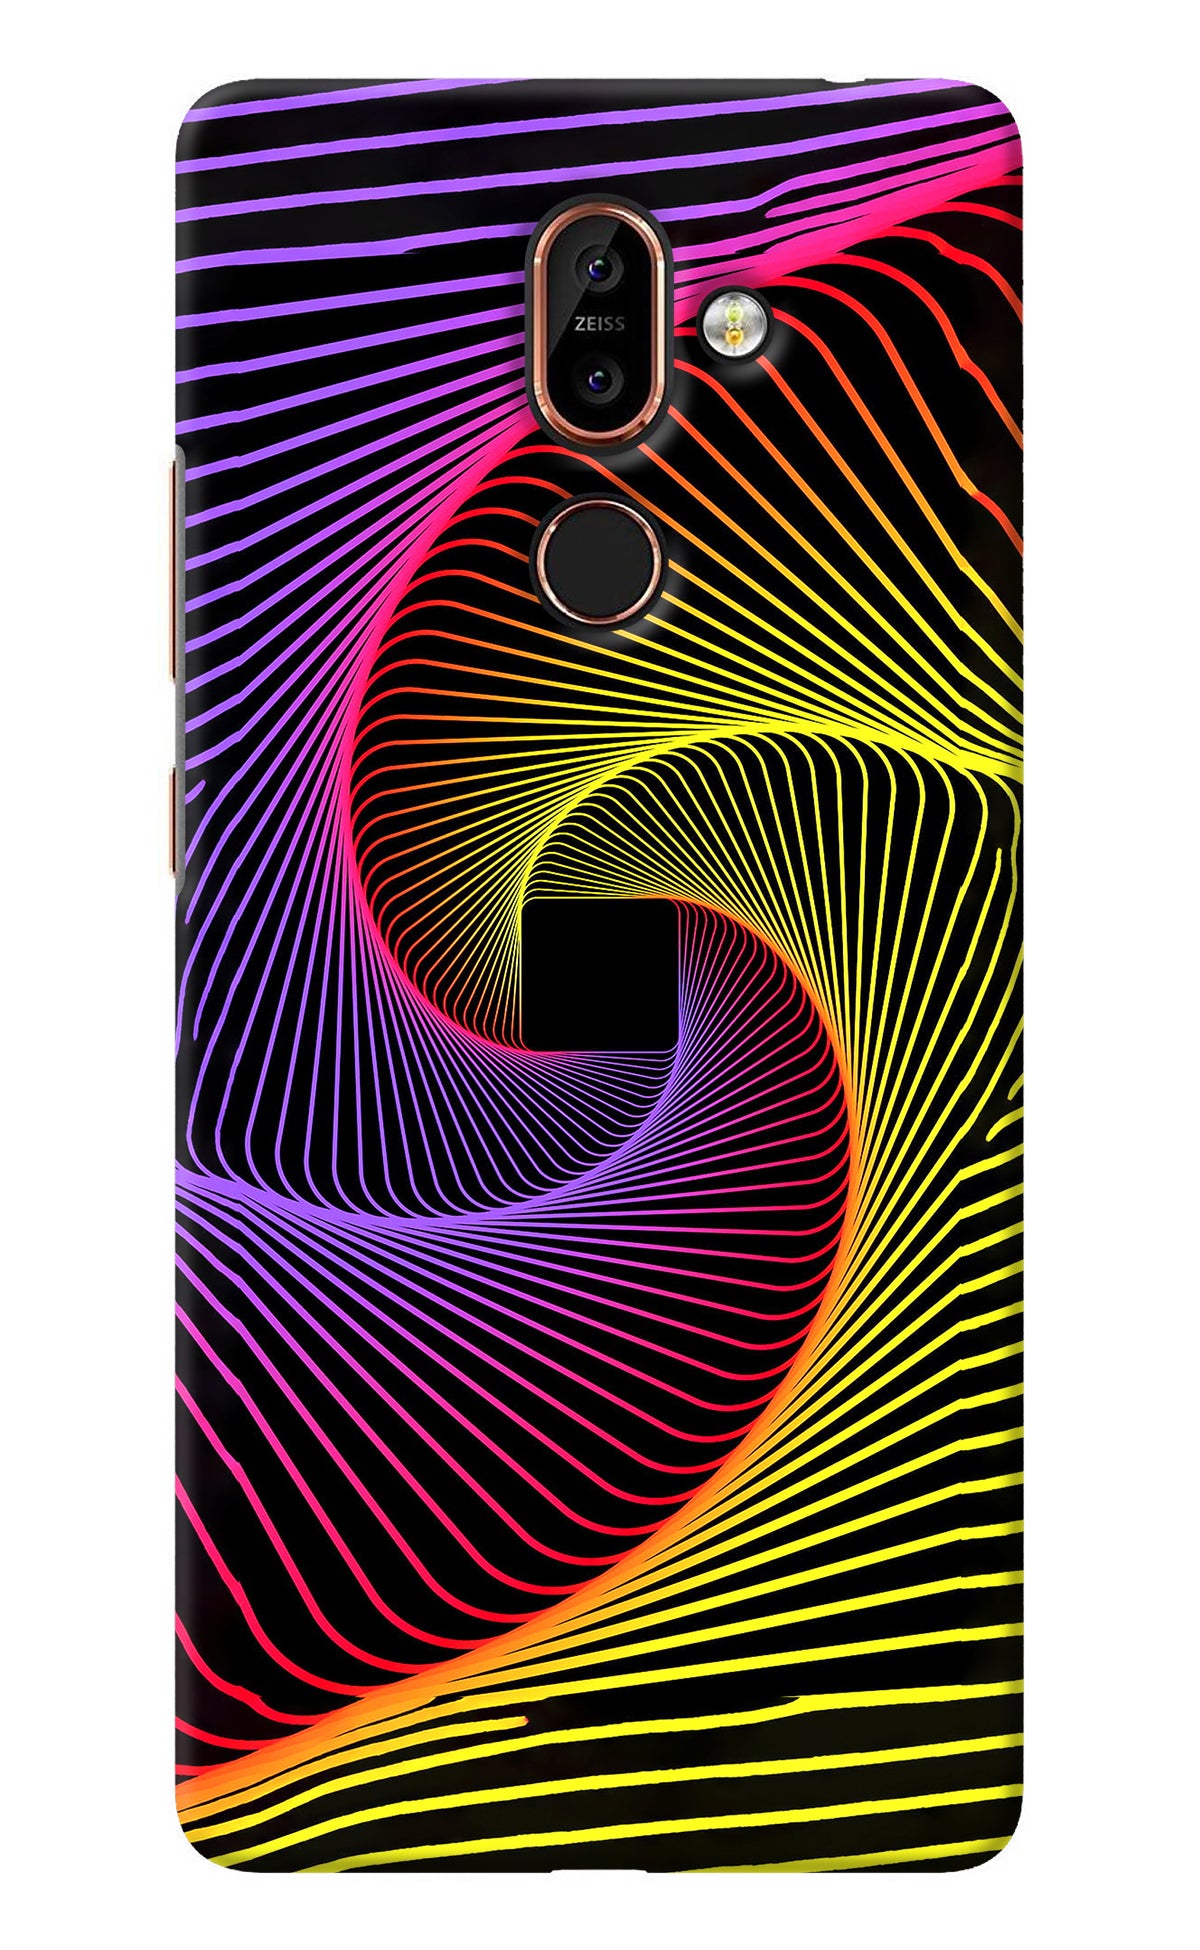 Colorful Strings Nokia 7 Plus Back Cover